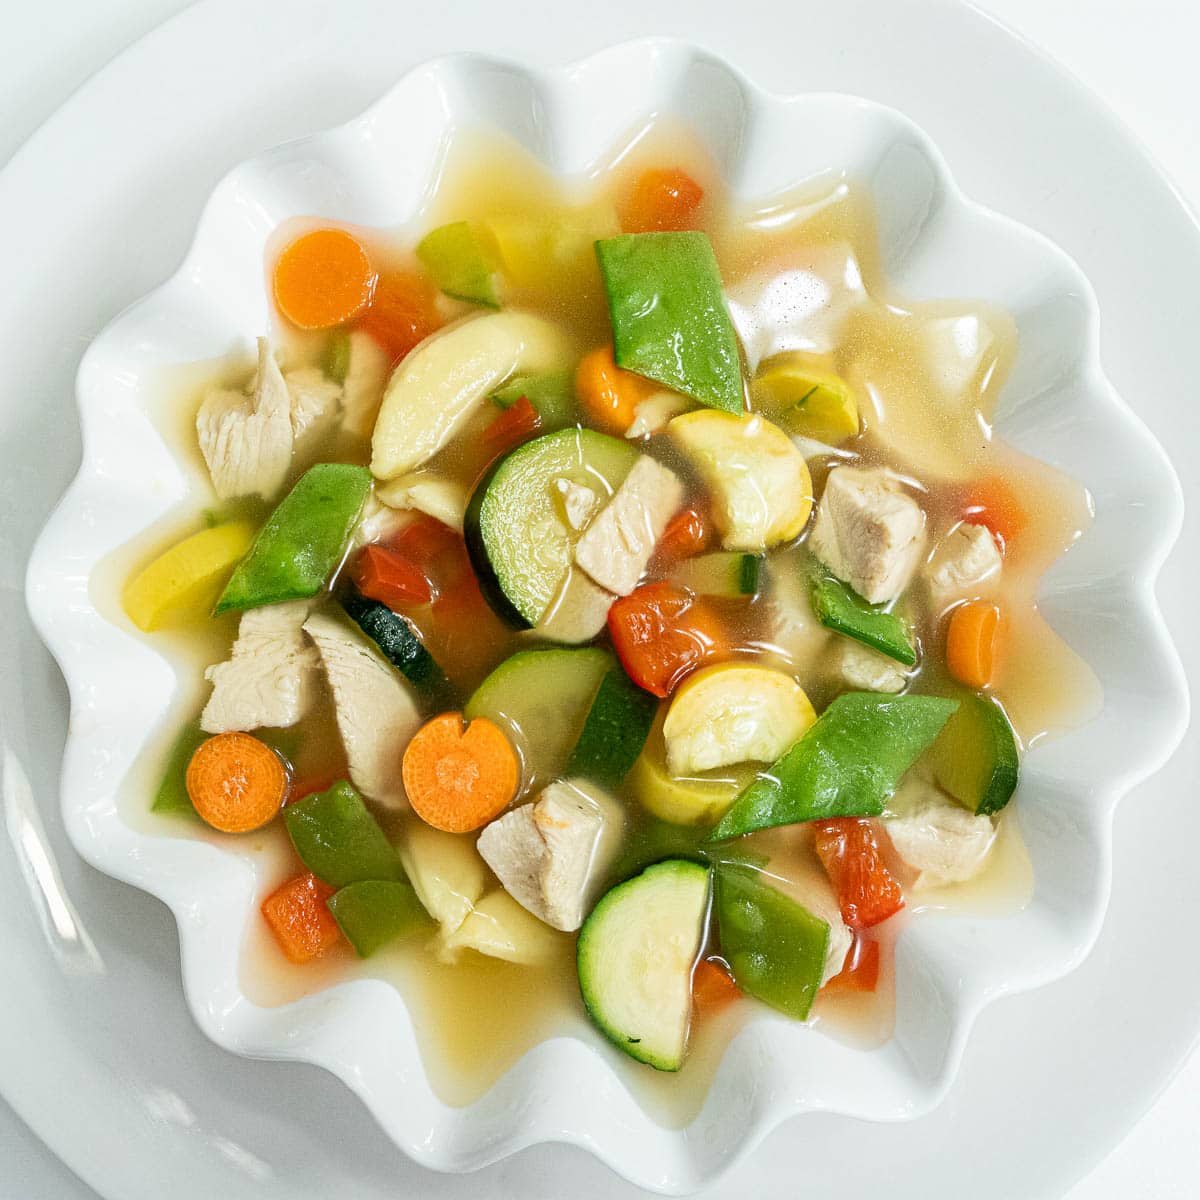 Spoo is a light, easy to make chicken soup with carrots, zuchinni, snow peas, carrots, yellow squash, and red peppers.